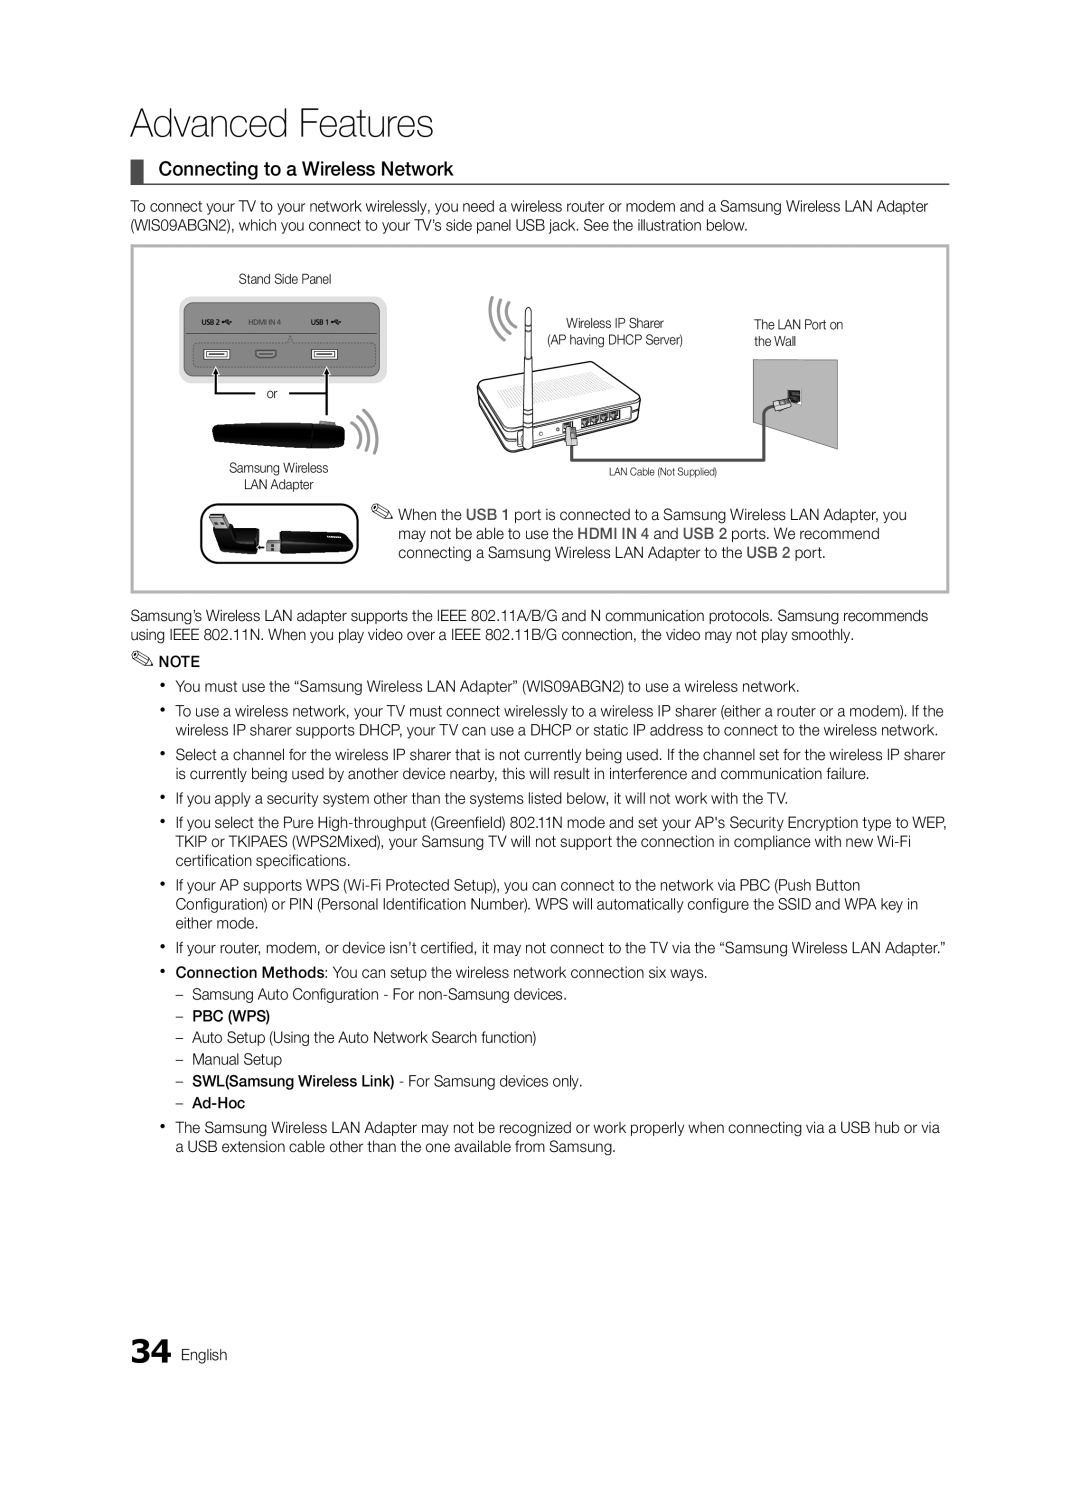 Samsung BN68-03088A-01, Series C9 user manual Connecting to a Wireless Network, Advanced Features 